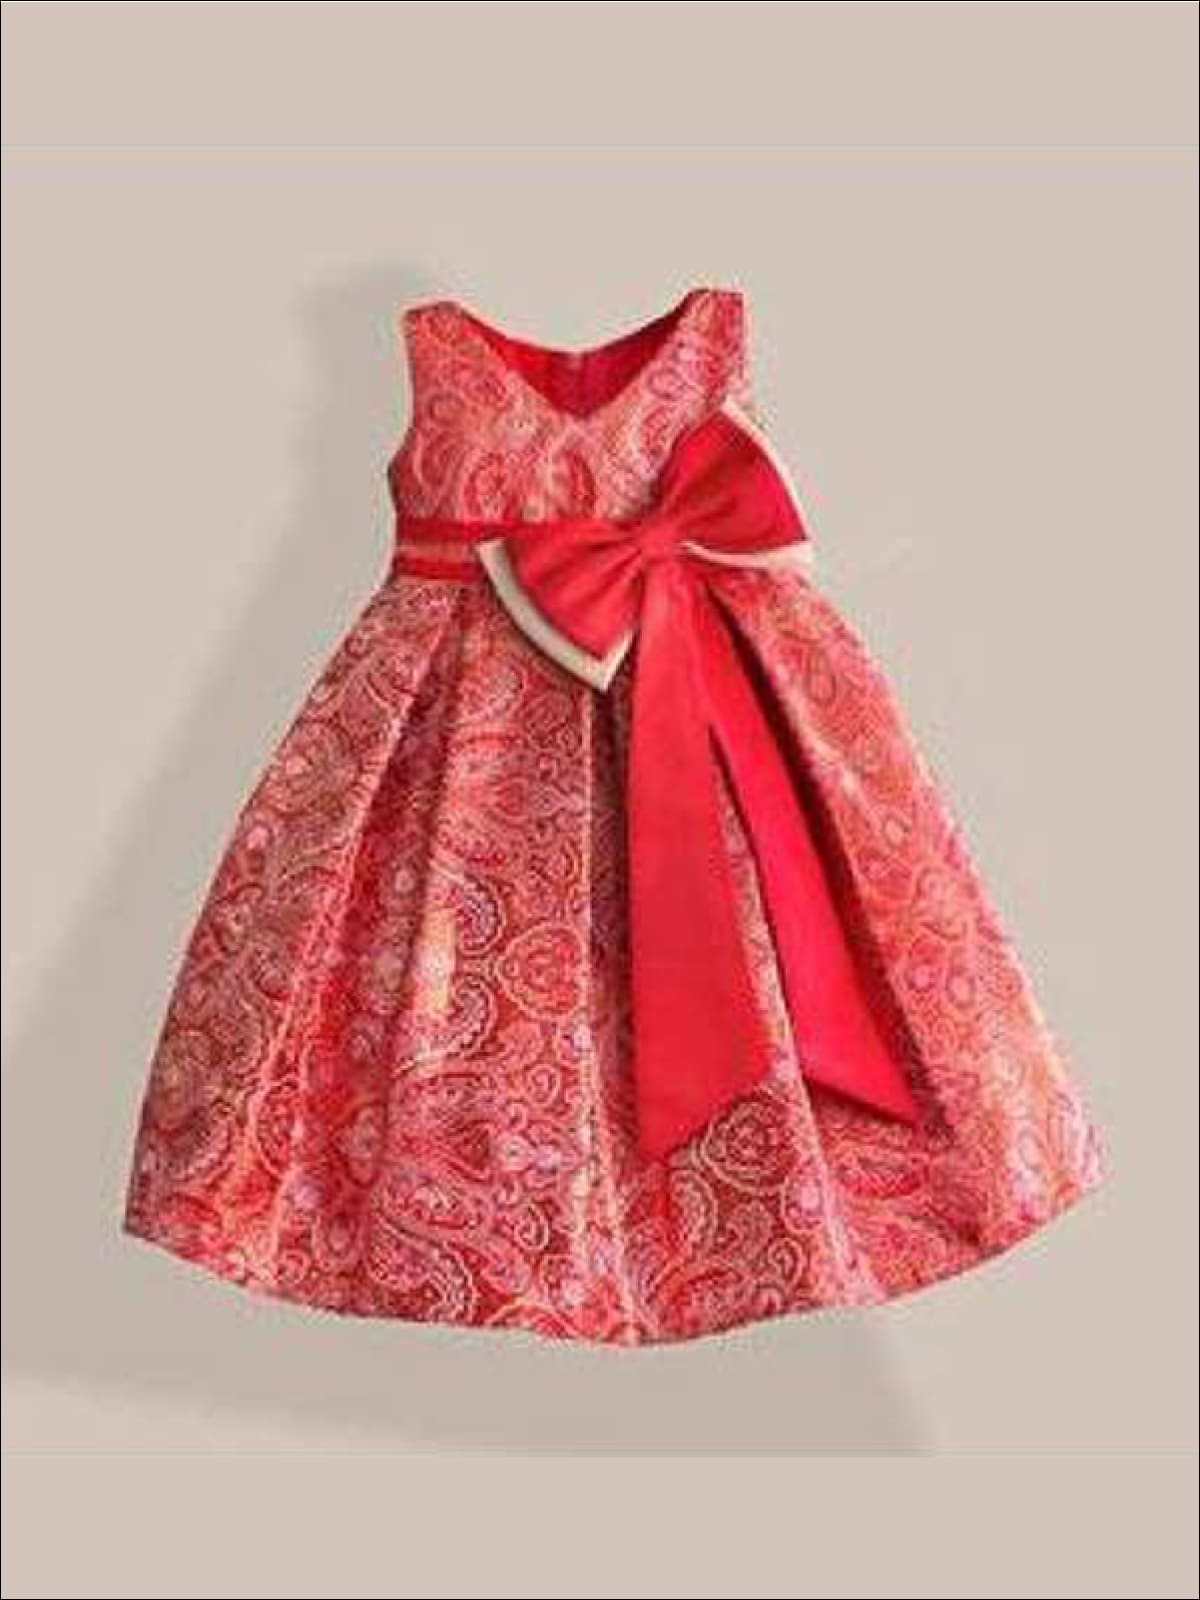 Girls Red & Gold Paisley Print Party Dress with Large Bow - Red & Gold / 3T - Girls Dresses